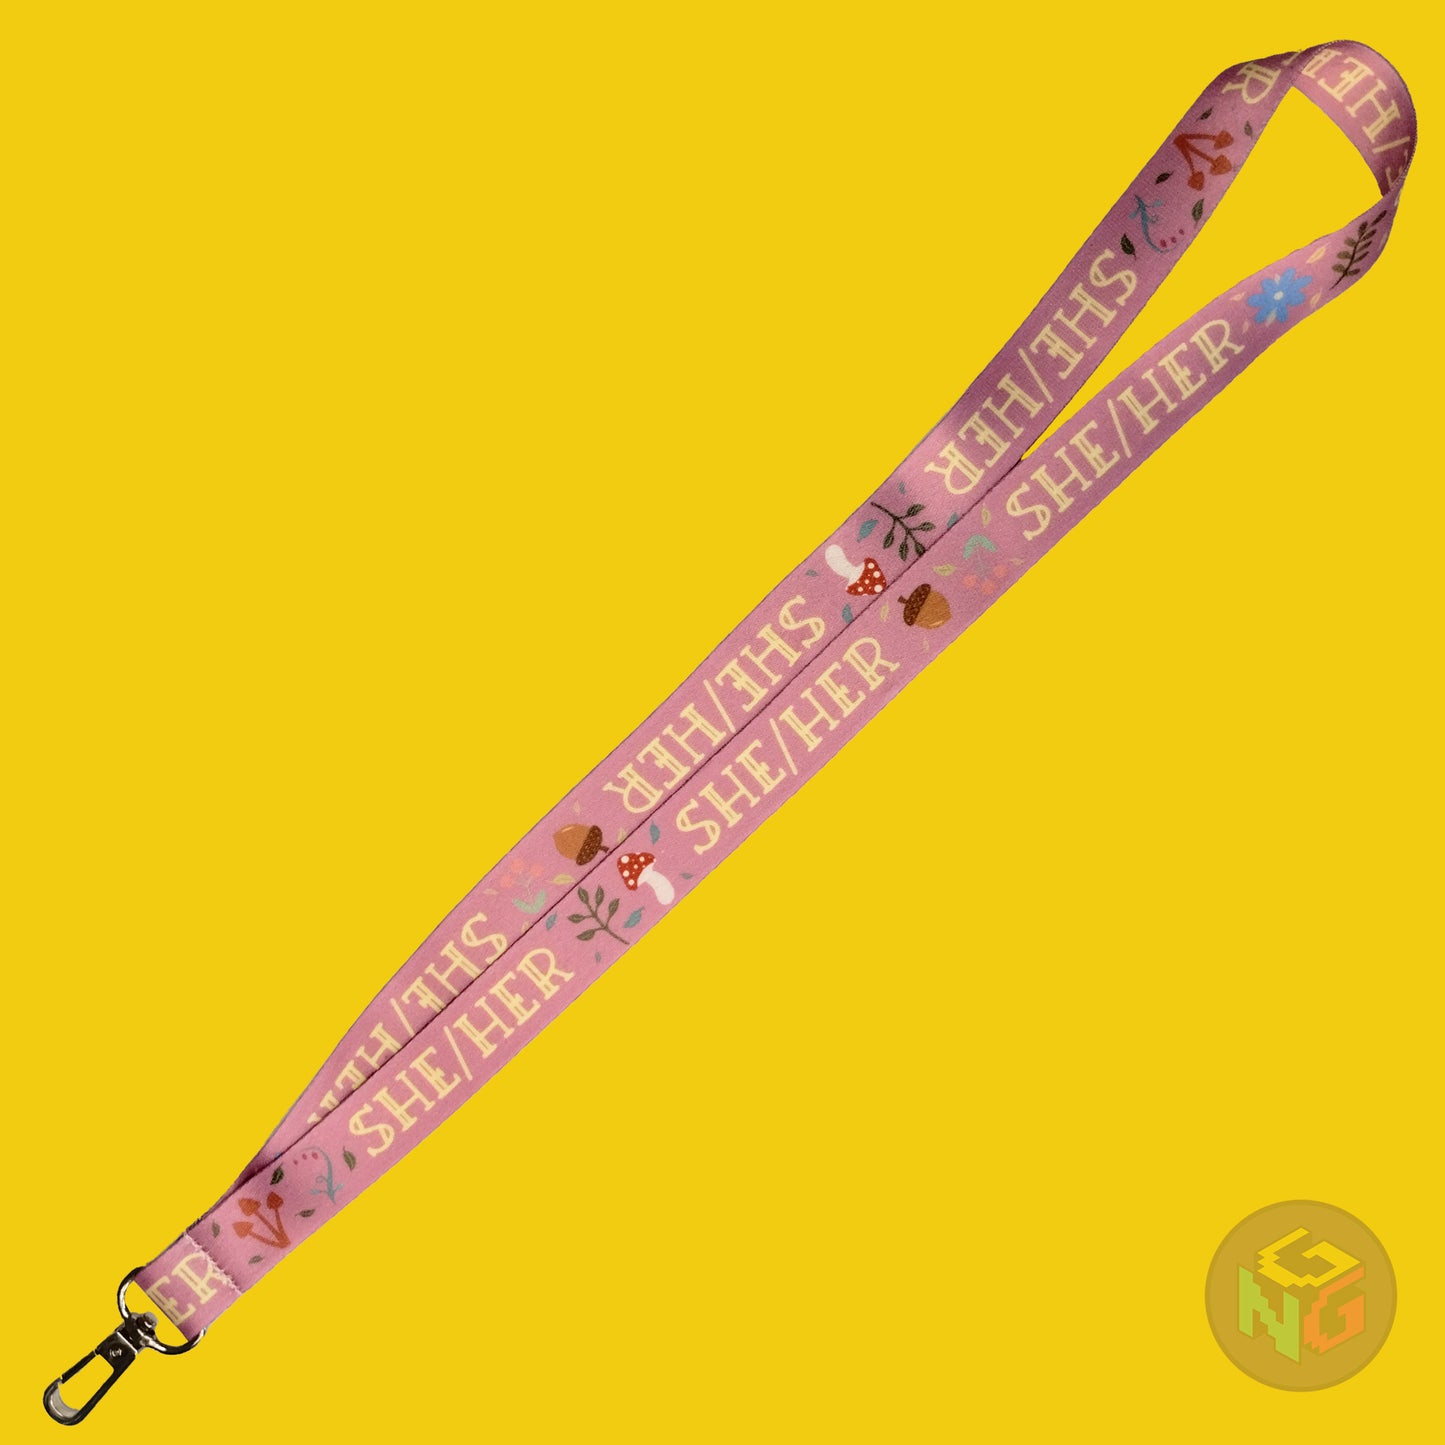 the pink she her cottagecore lanyard lying flat showing the complete design and repeating pattern of acorns, berries, mushrooms, leaves, and she her pronouns